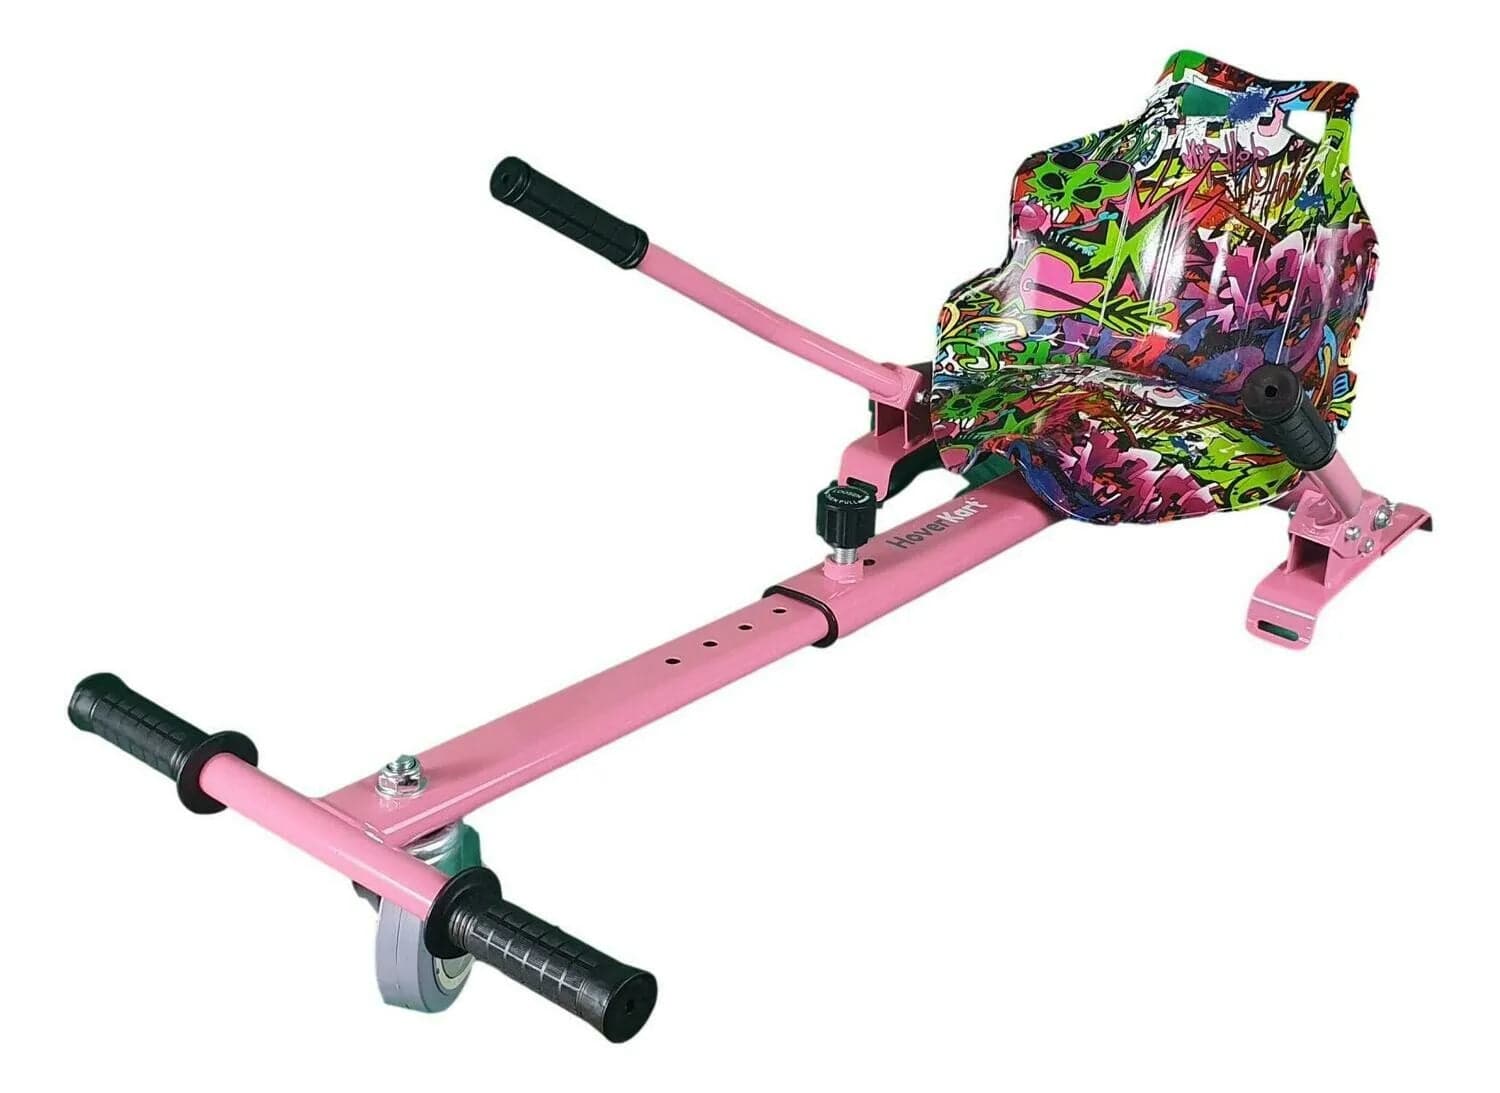 Western Sports Centre HoverKart Pink and Green HoverKart Buggy Kart for Balance Scooter Hoverboard